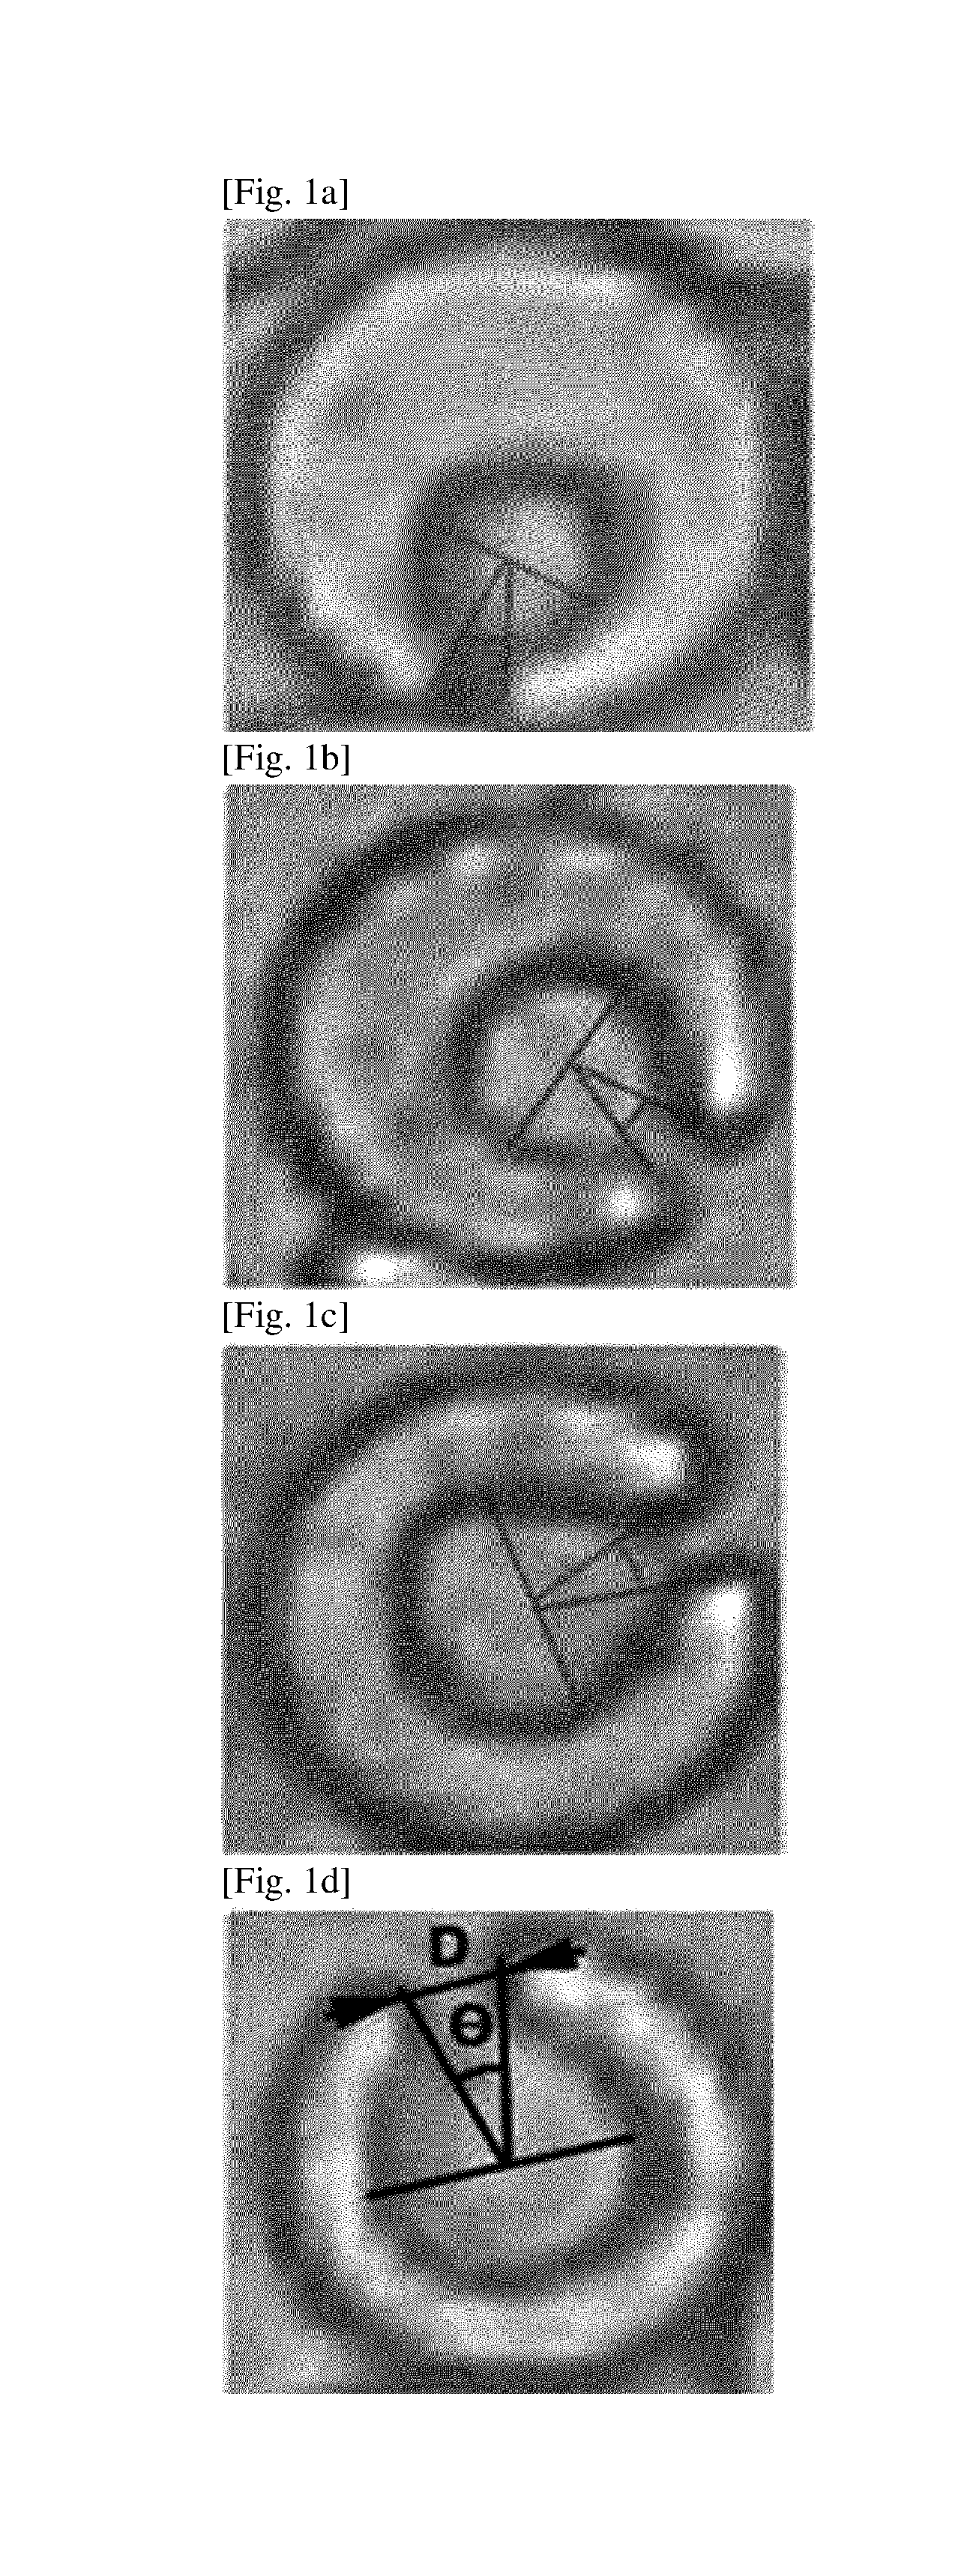 C-Shaped Composite Fiber, C-Shaped Hollow Fiber Thereof, Fabric Including Same, And Method For Manufacturing Same